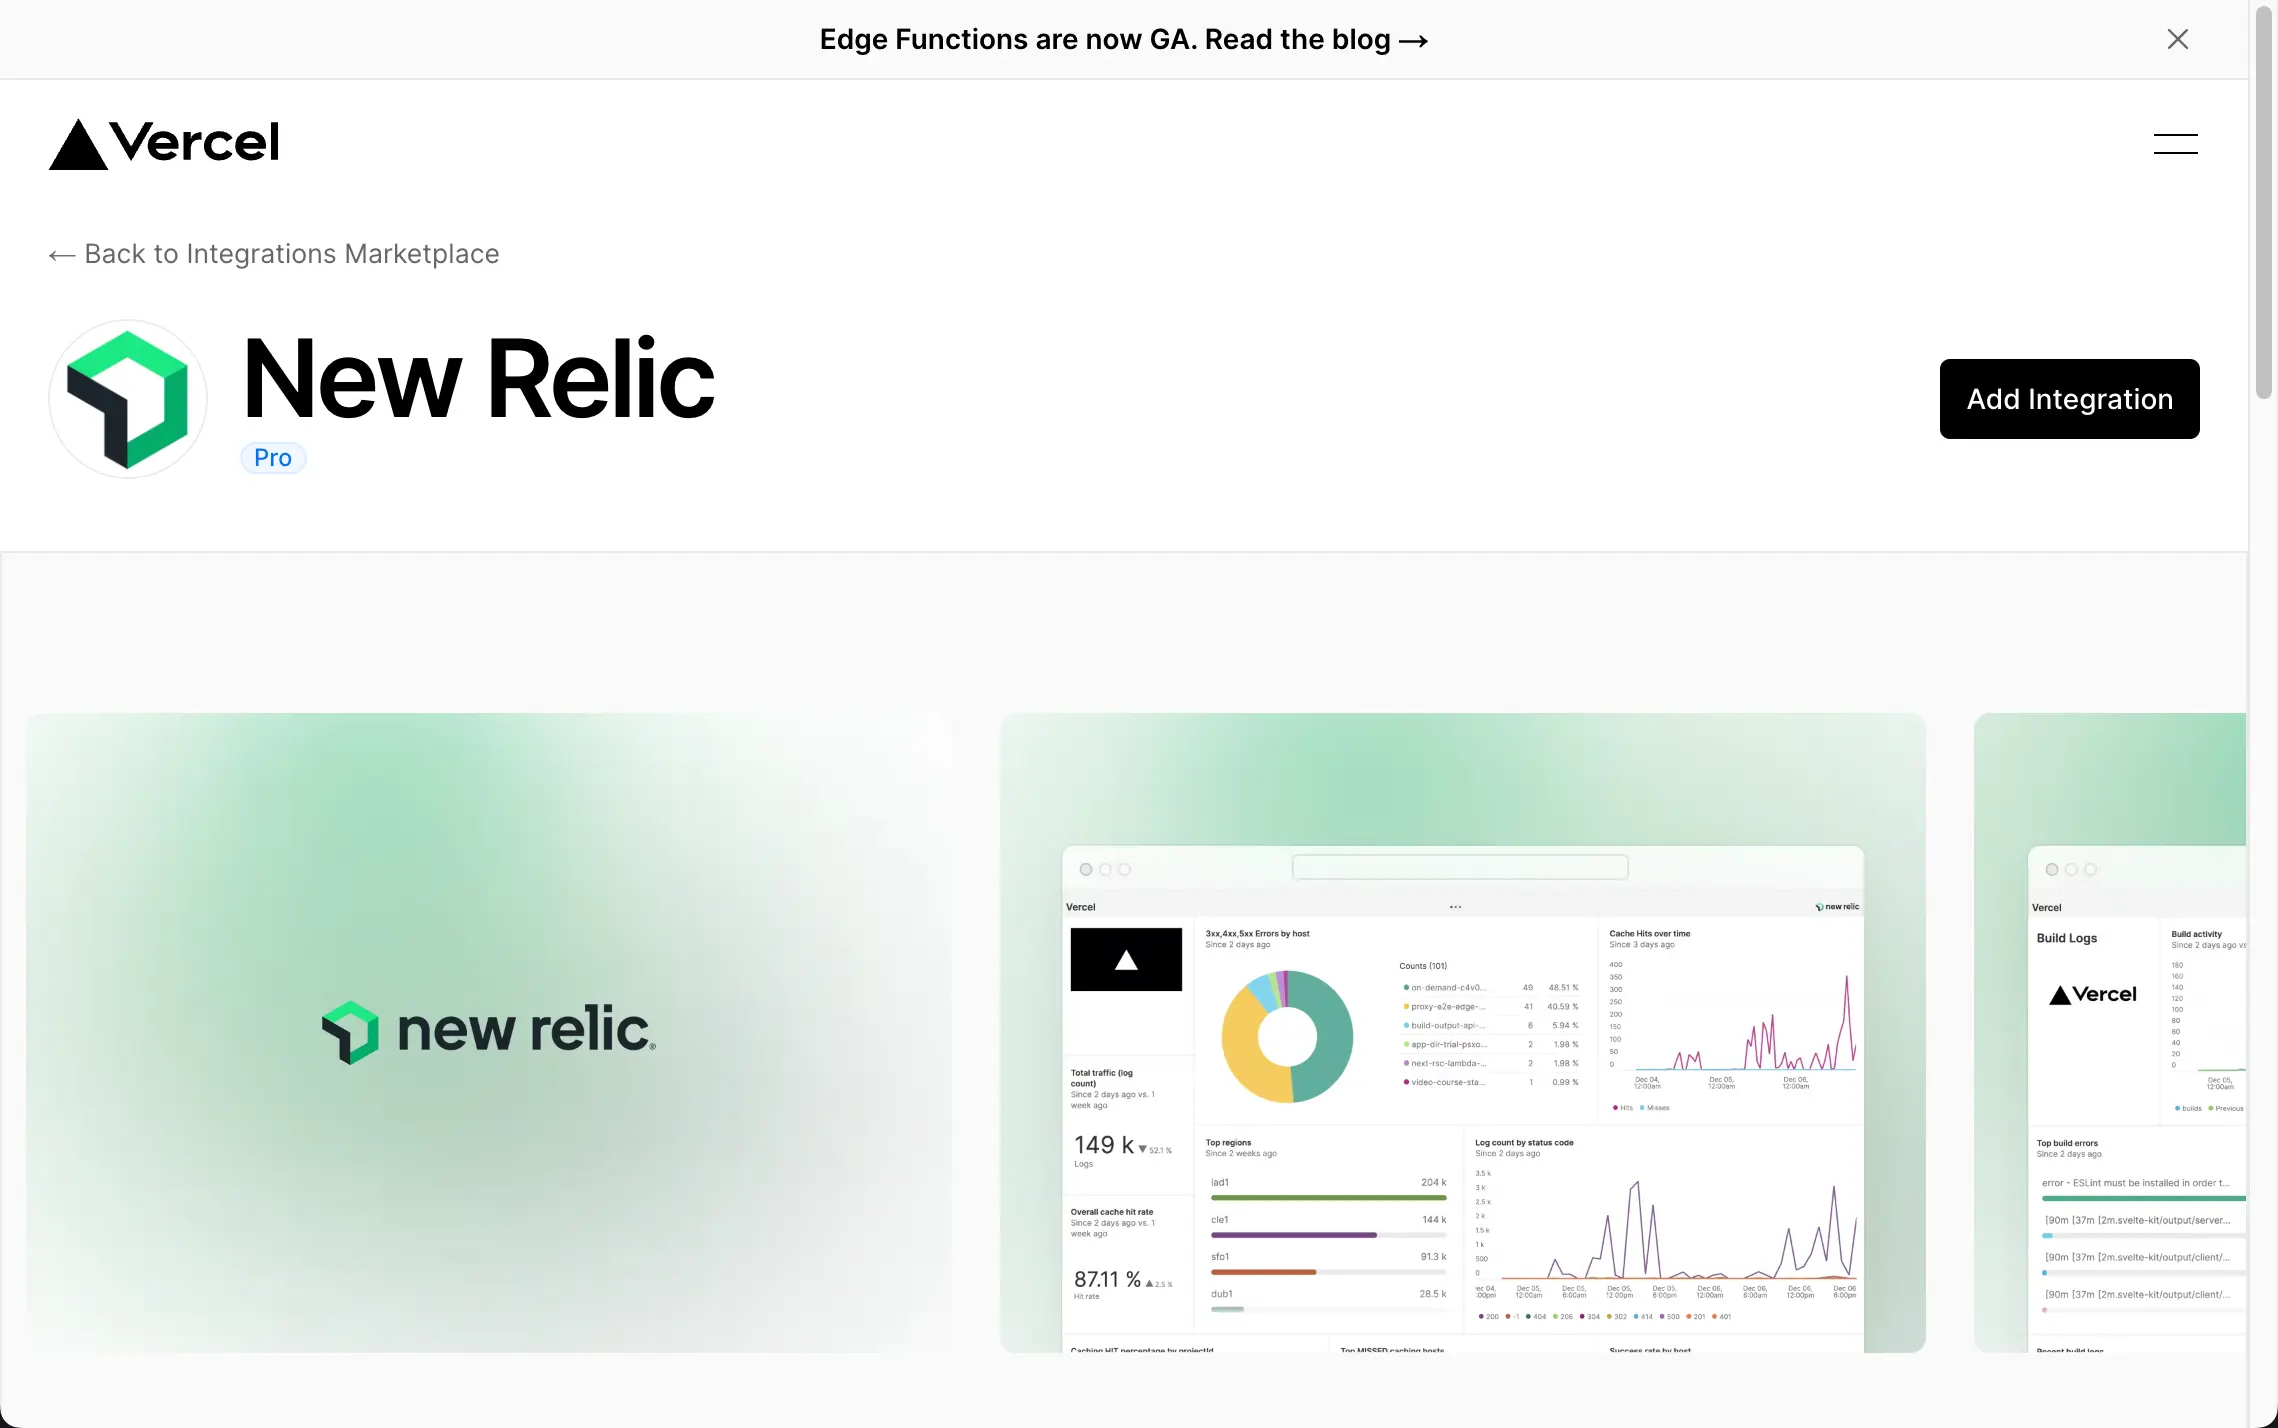 Vercel's New Relic integration page